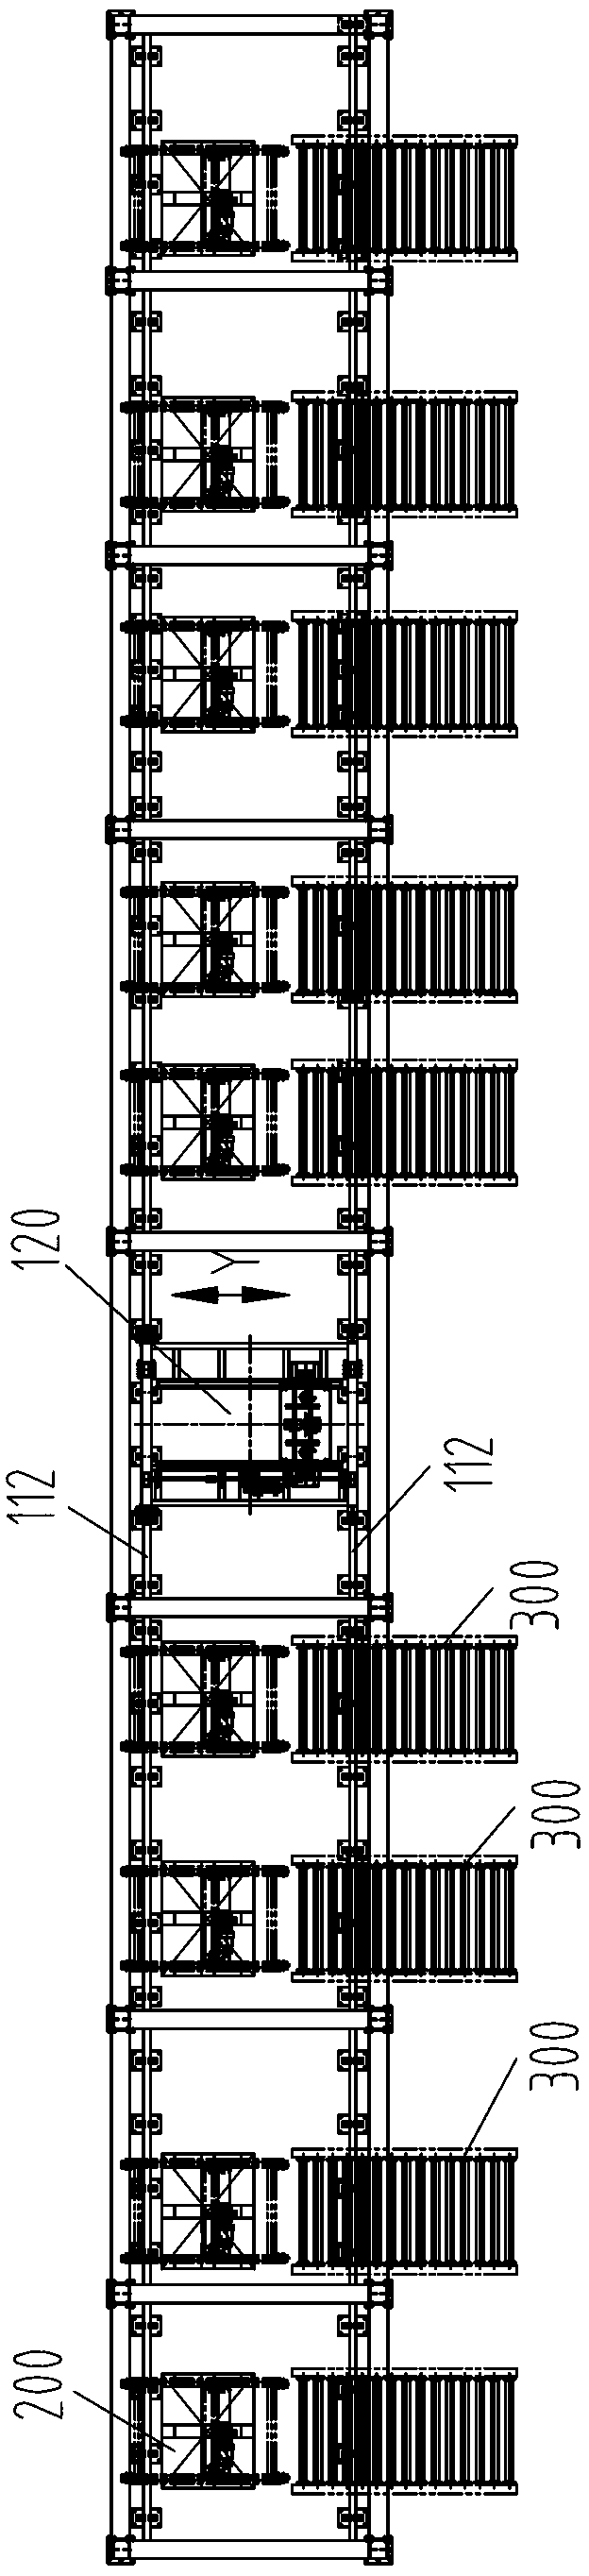 Automatic rock core box tray dismounting and stacking system and method